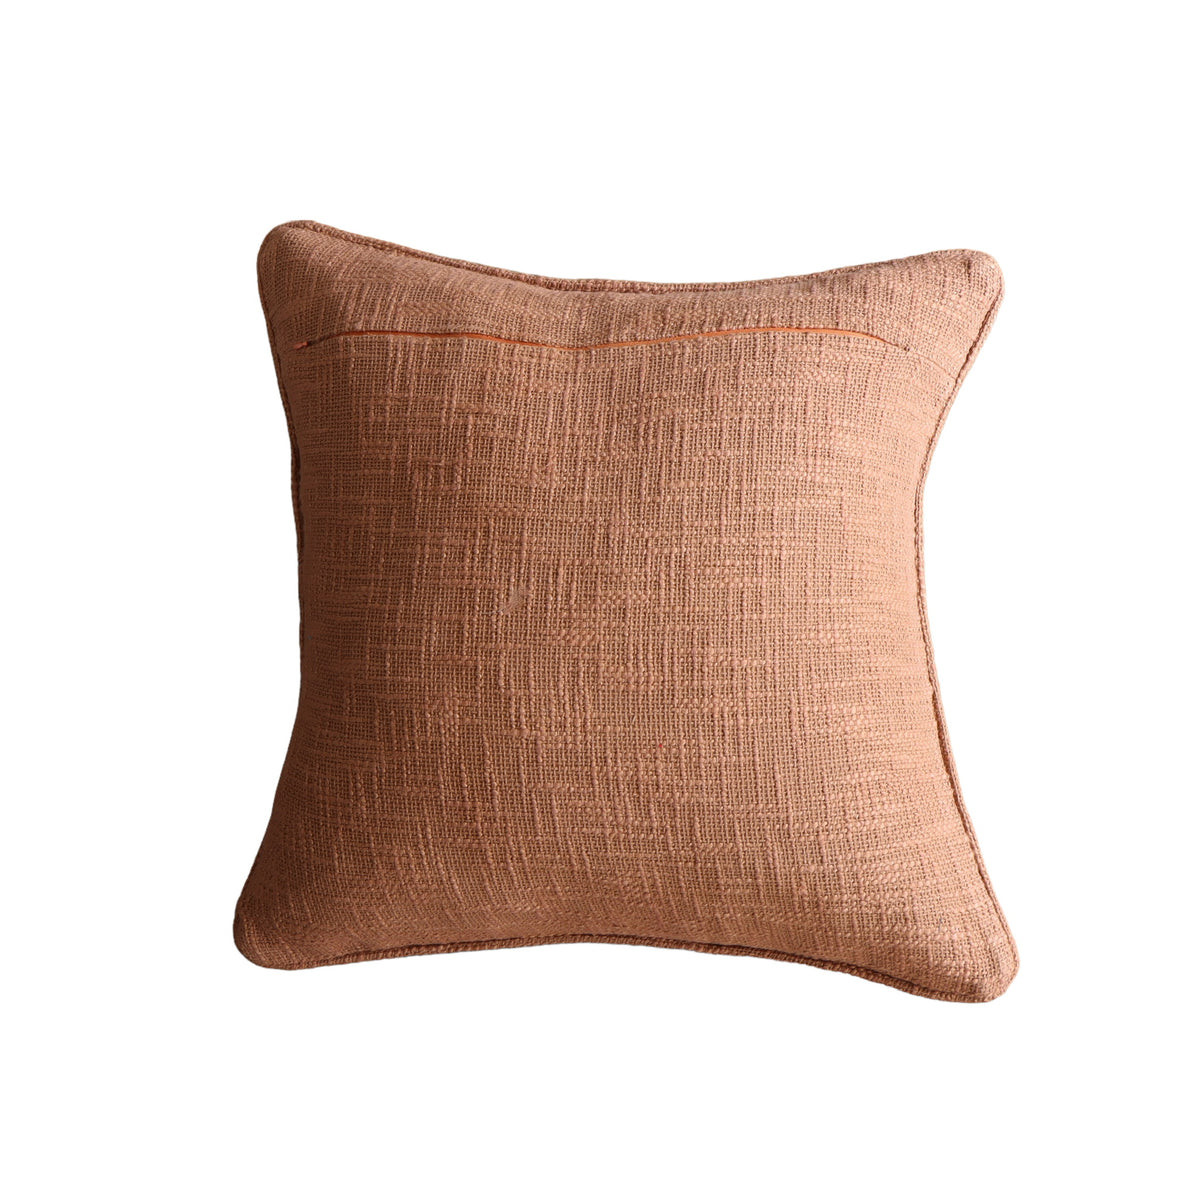 Terracotta Cotton Pillow Cover with Piping - 20 inch - Holistic Habitat 